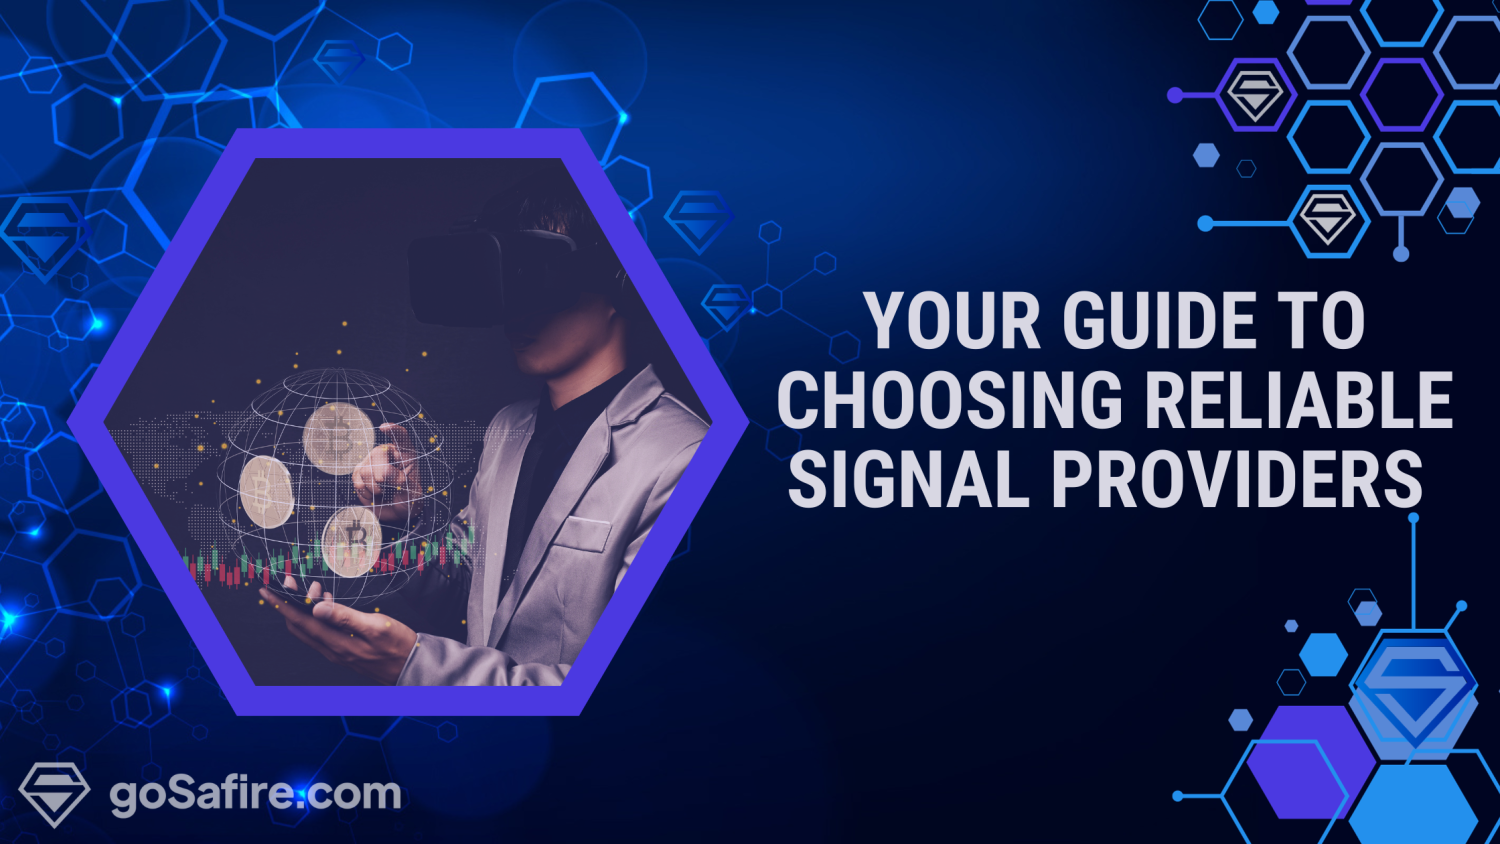 Your Trusted Guide to Choosing Reliable Signal Providers